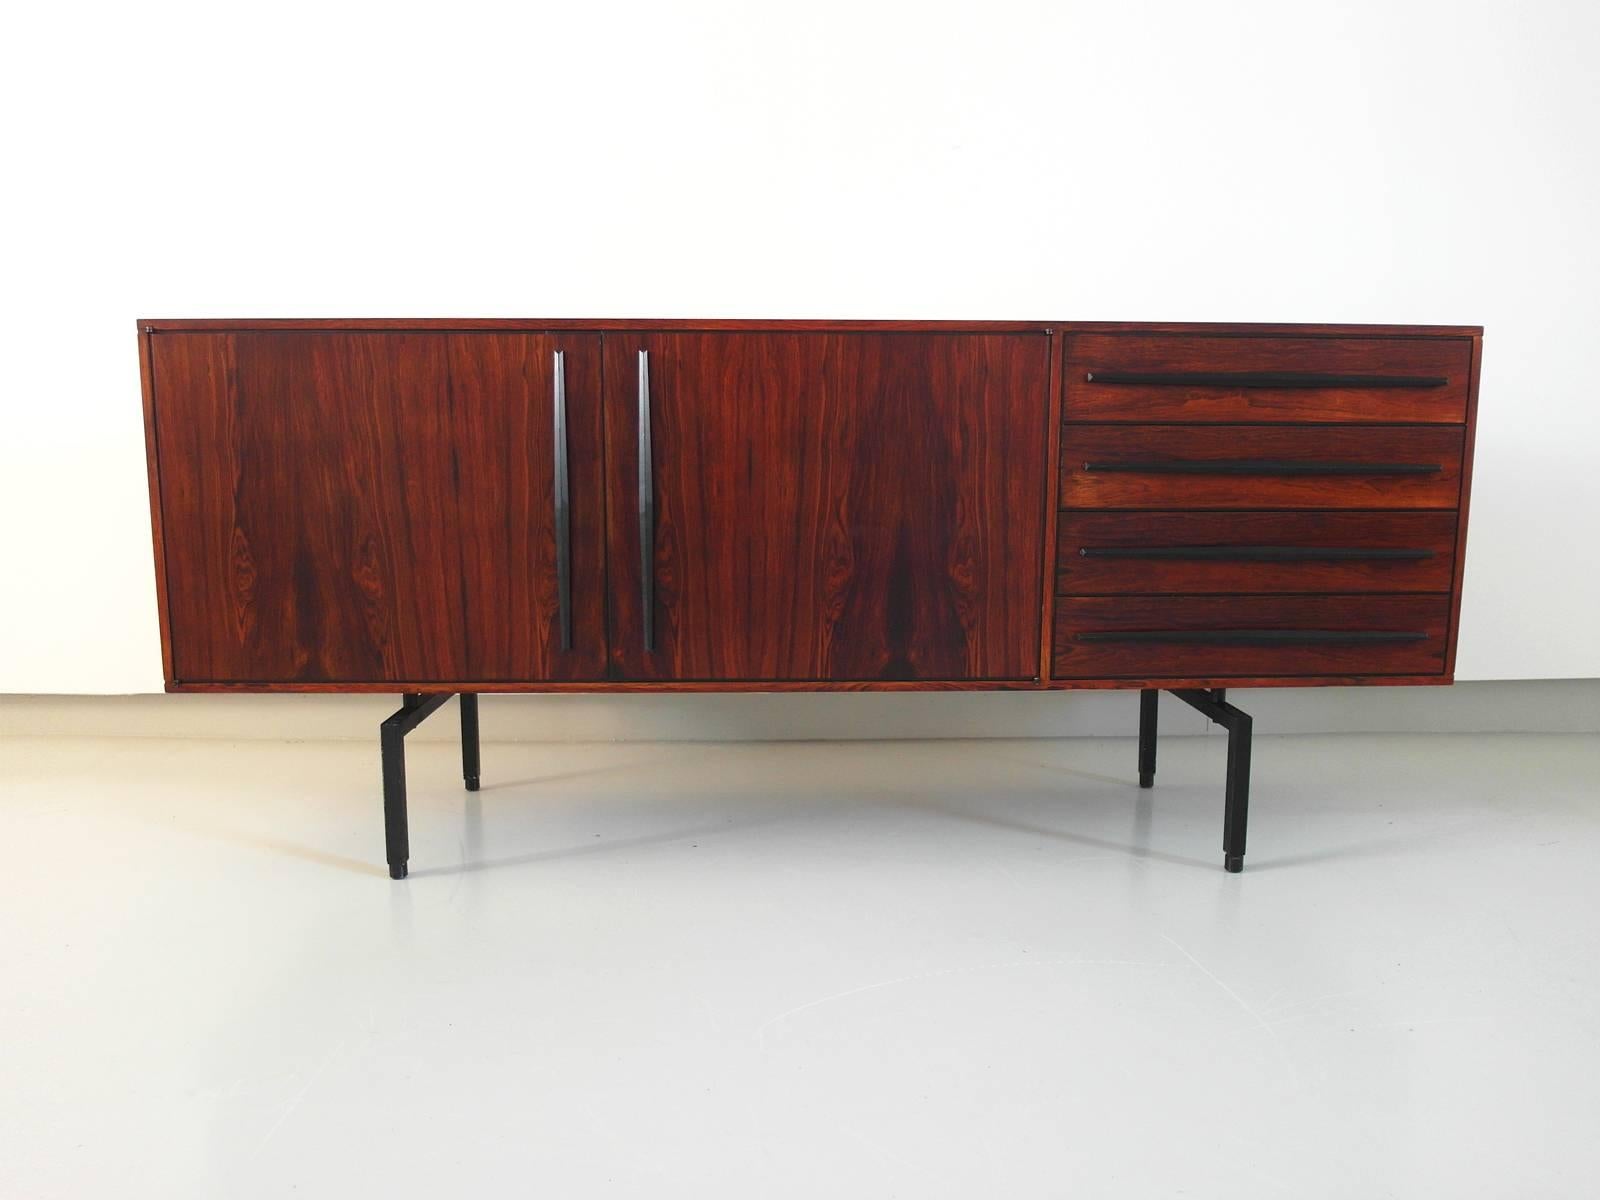 A very sleek and light high quality sideboard, Italy, circa 1955. This small sideboard has beautiful details and is made from high quality materials. The back of the sideboard is finished with rosewood as well, so it would also be possible to use it